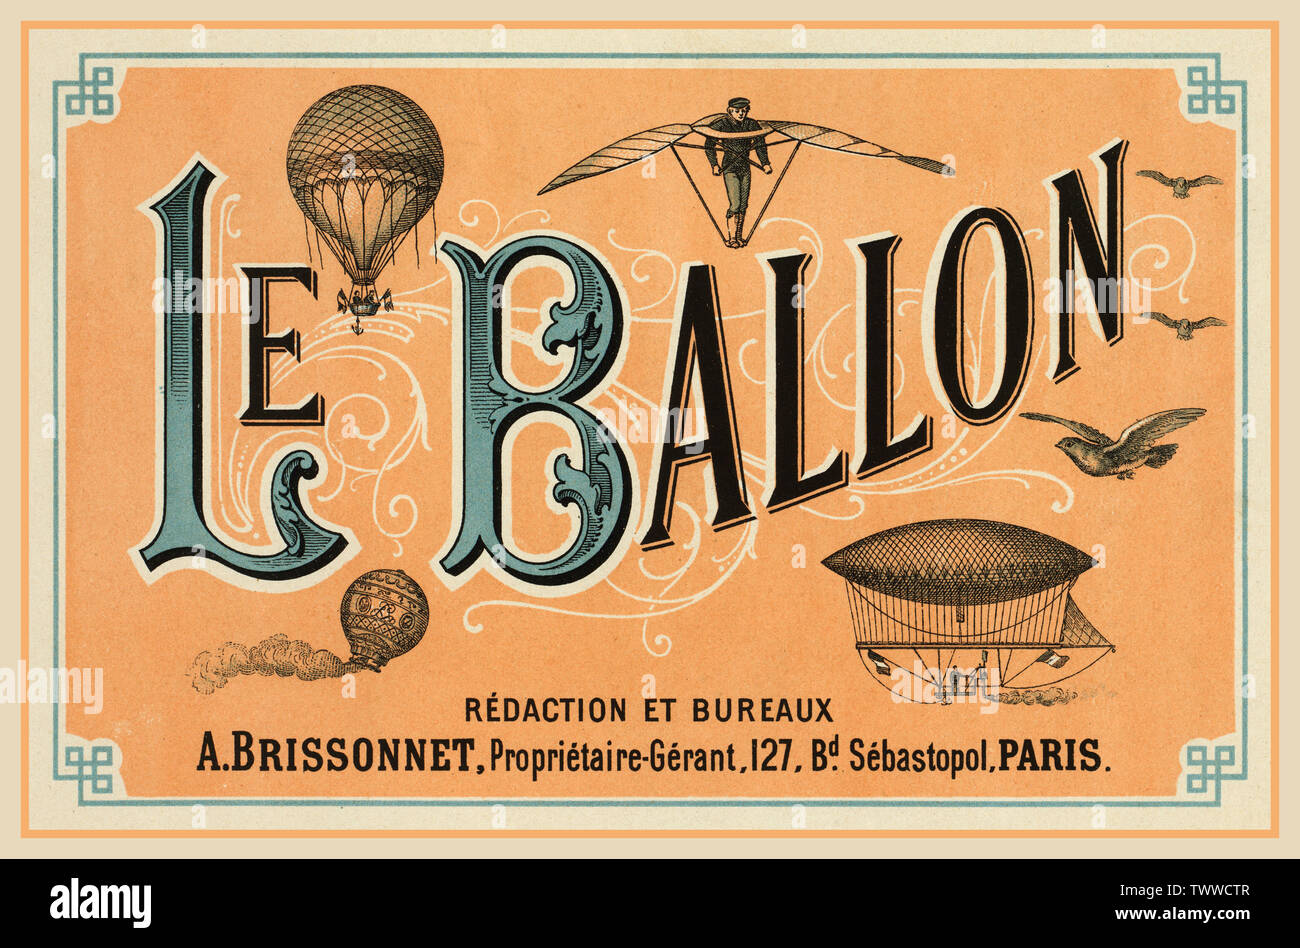 Vintage 1880’s poster for French aeronautical journal “Le  Ballon' and the various types of flight of an ornithopter, early balloons and an airship. Text on verso advertises a balloon merchant: 'A. Brissonnet” rubber balloons, to inflate gas ... with printed and colored drawings from 30 cm in circumference up to 4 meters ... balloons for ascents from 200 to 2,000 cubic meters, able to carry from one to eight people. ' Chromolithograph, Paris, ca. 1883. Stock Photo